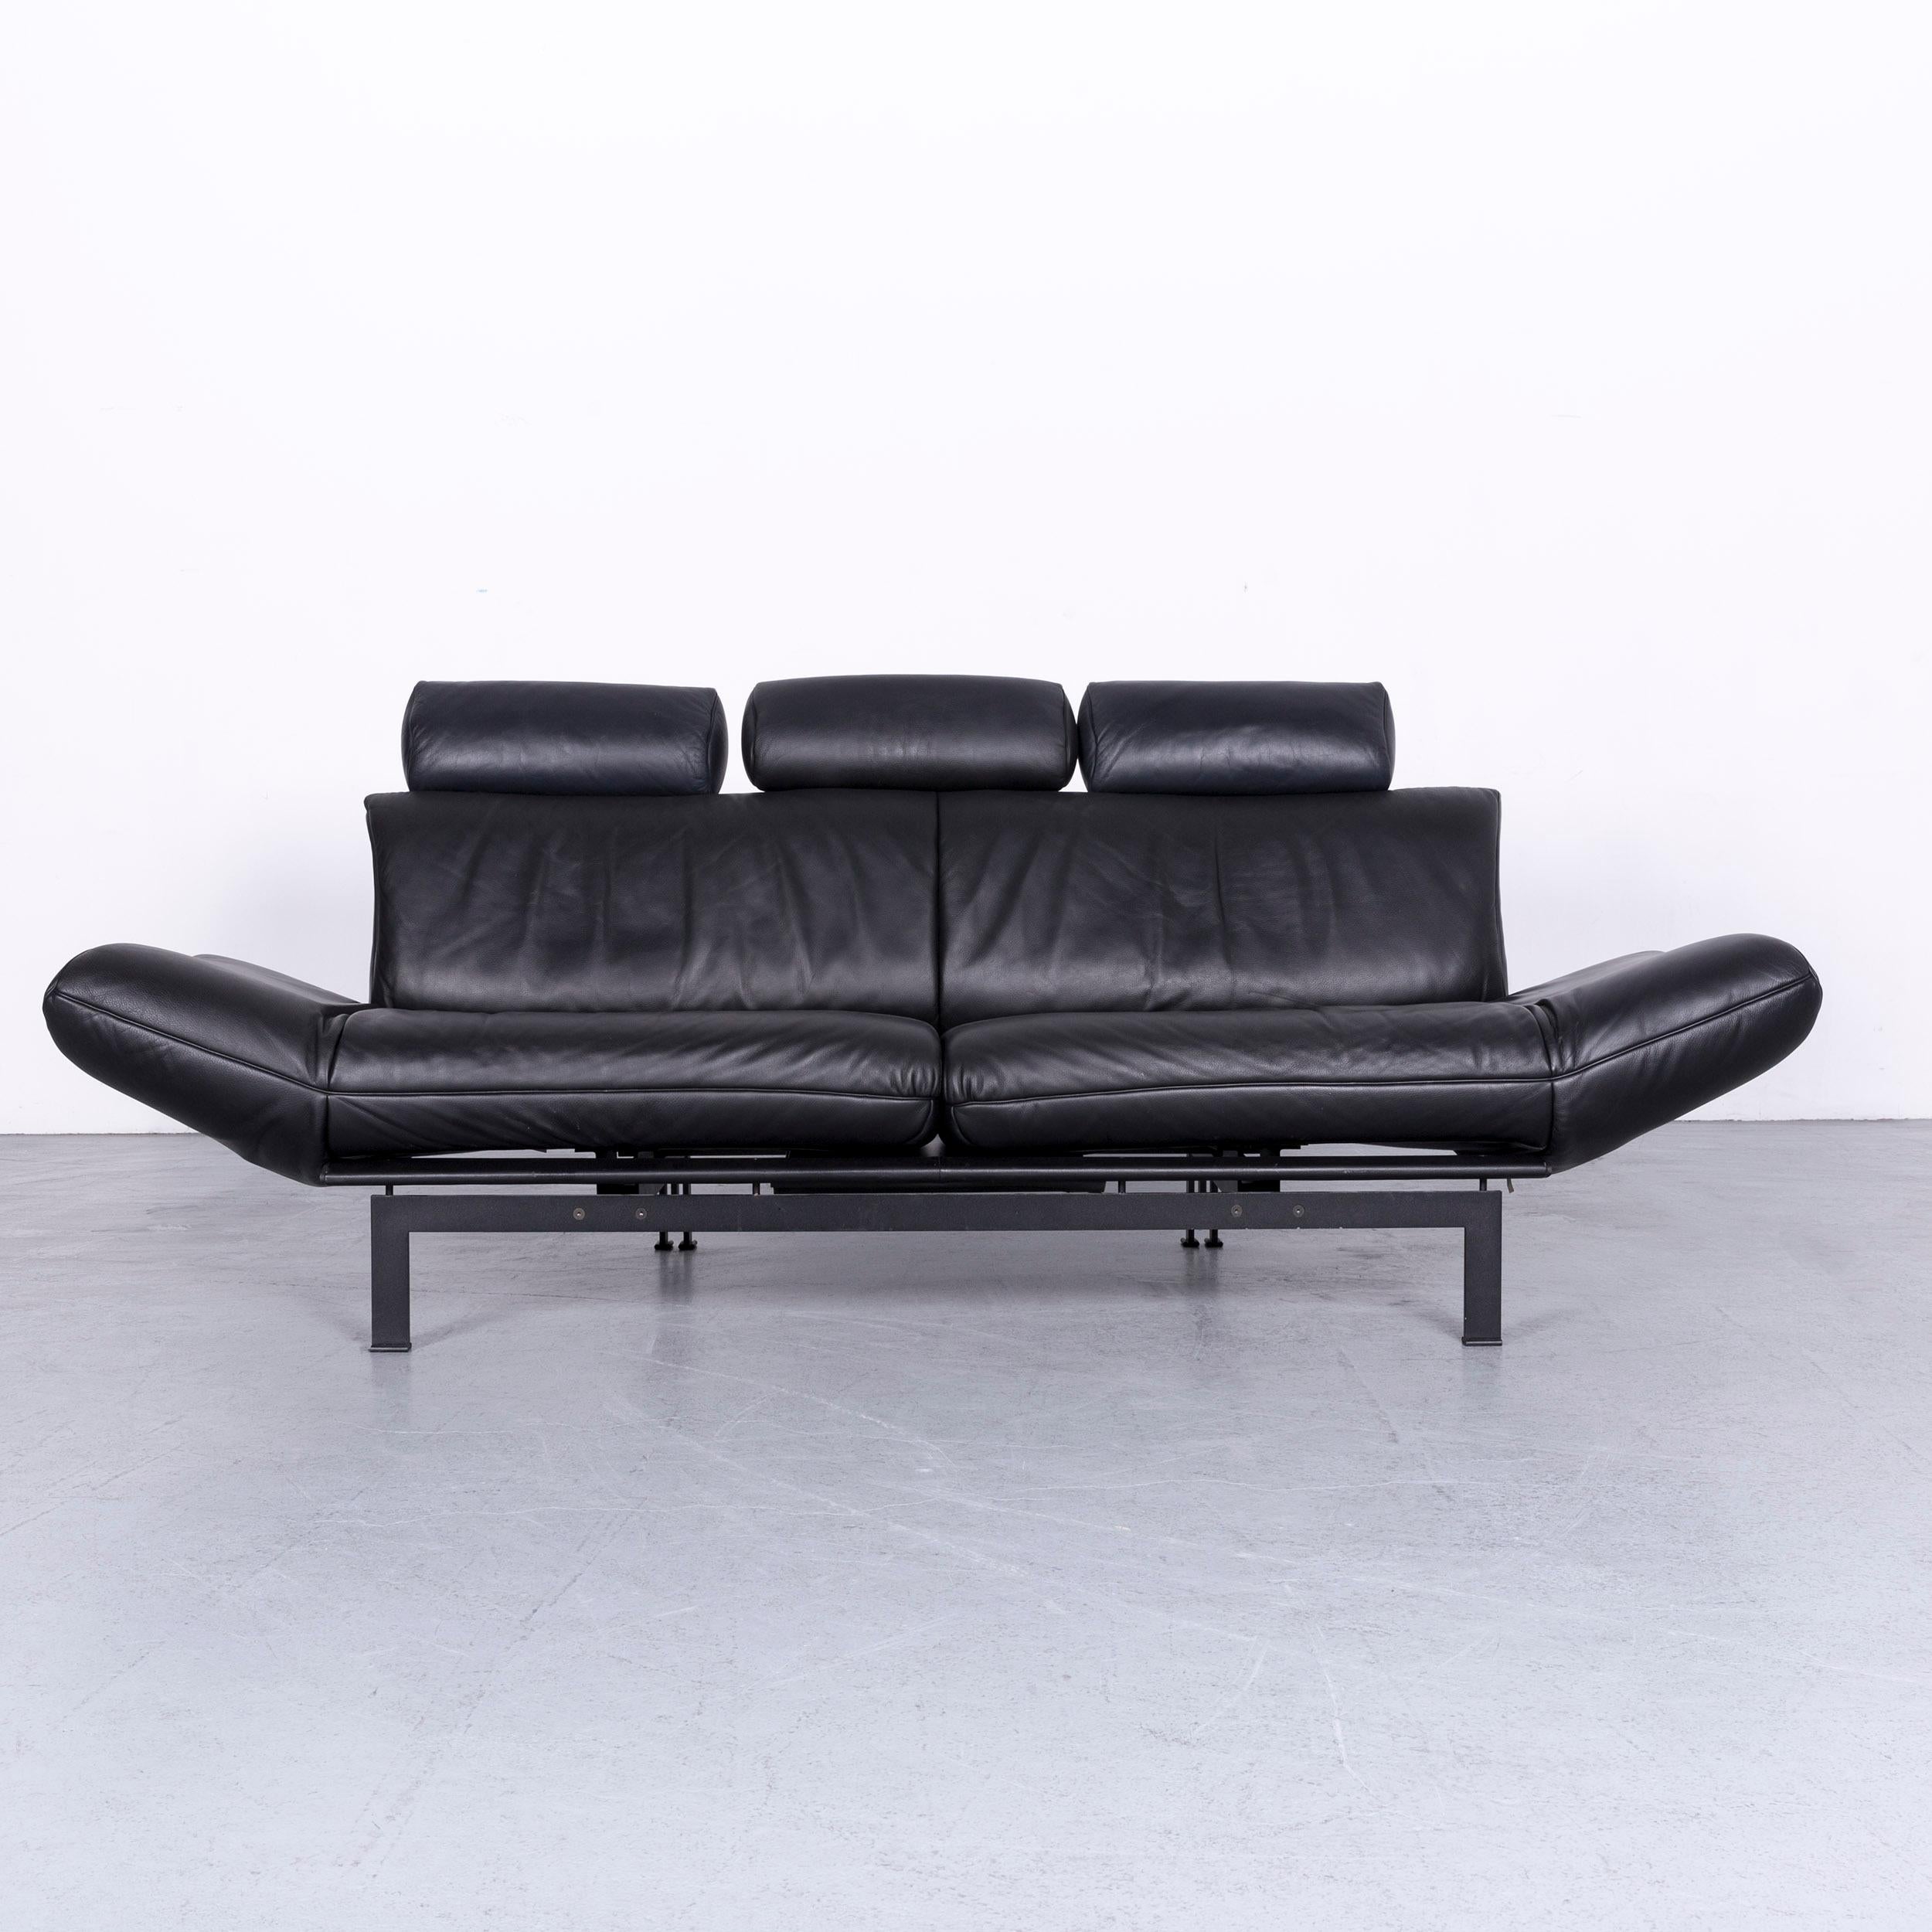 De Sede Ds 140 Designer Leather Sofa Black Three-Seat Function Modern In Excellent Condition For Sale In Cologne, DE